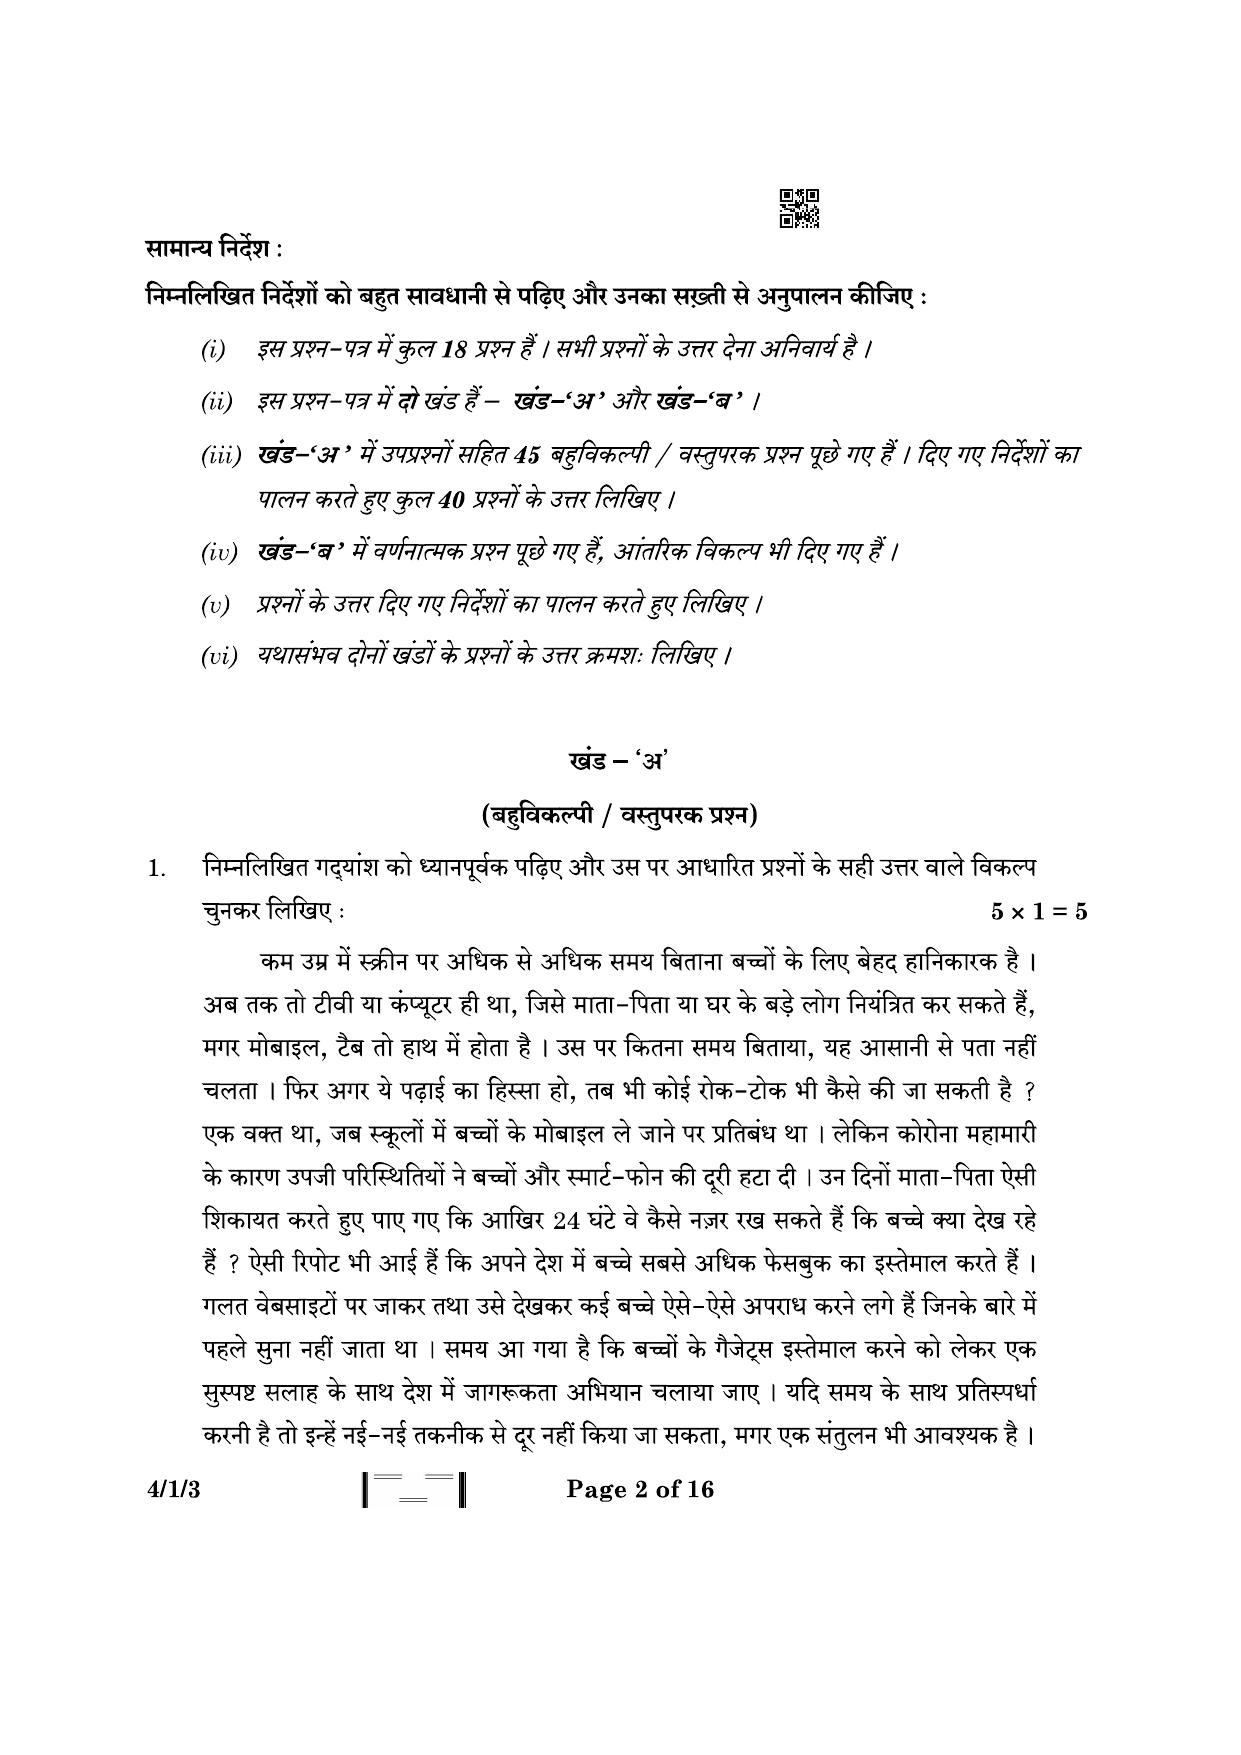 CBSE Class 10 4-1-3 Hindi B 2023 Question Paper - Page 2